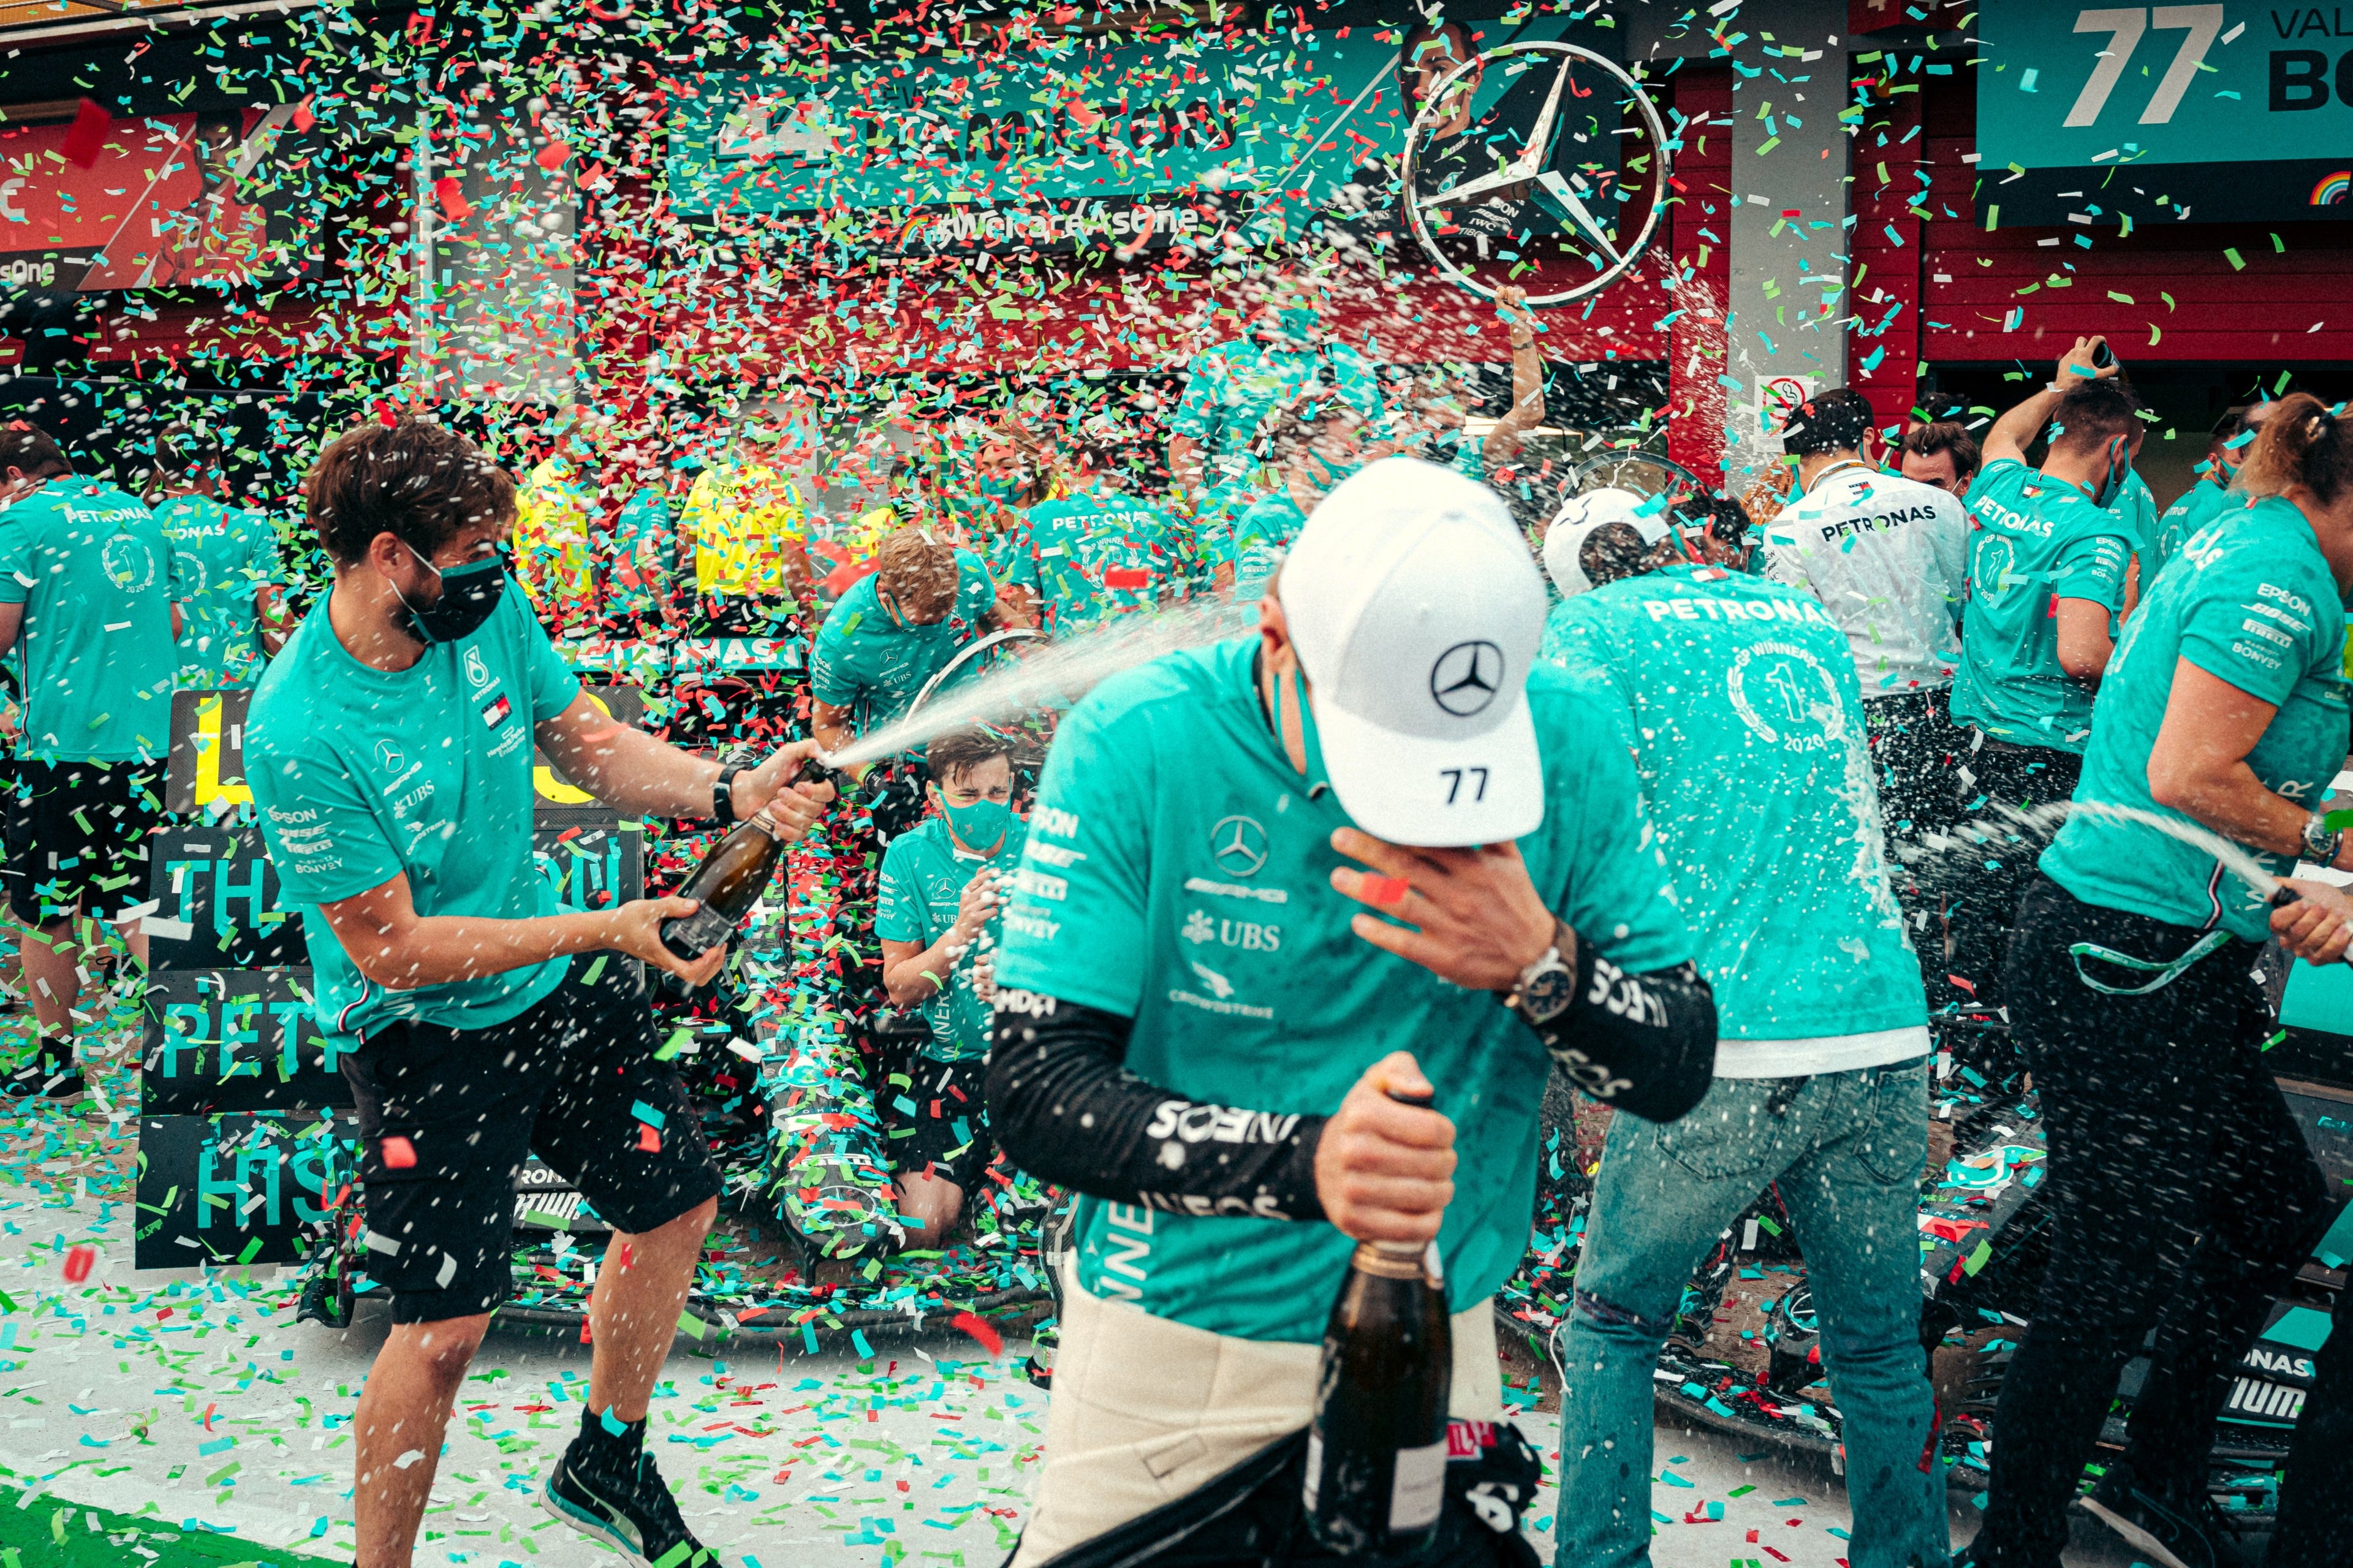 Confetti cannon fired over winning F1 team.